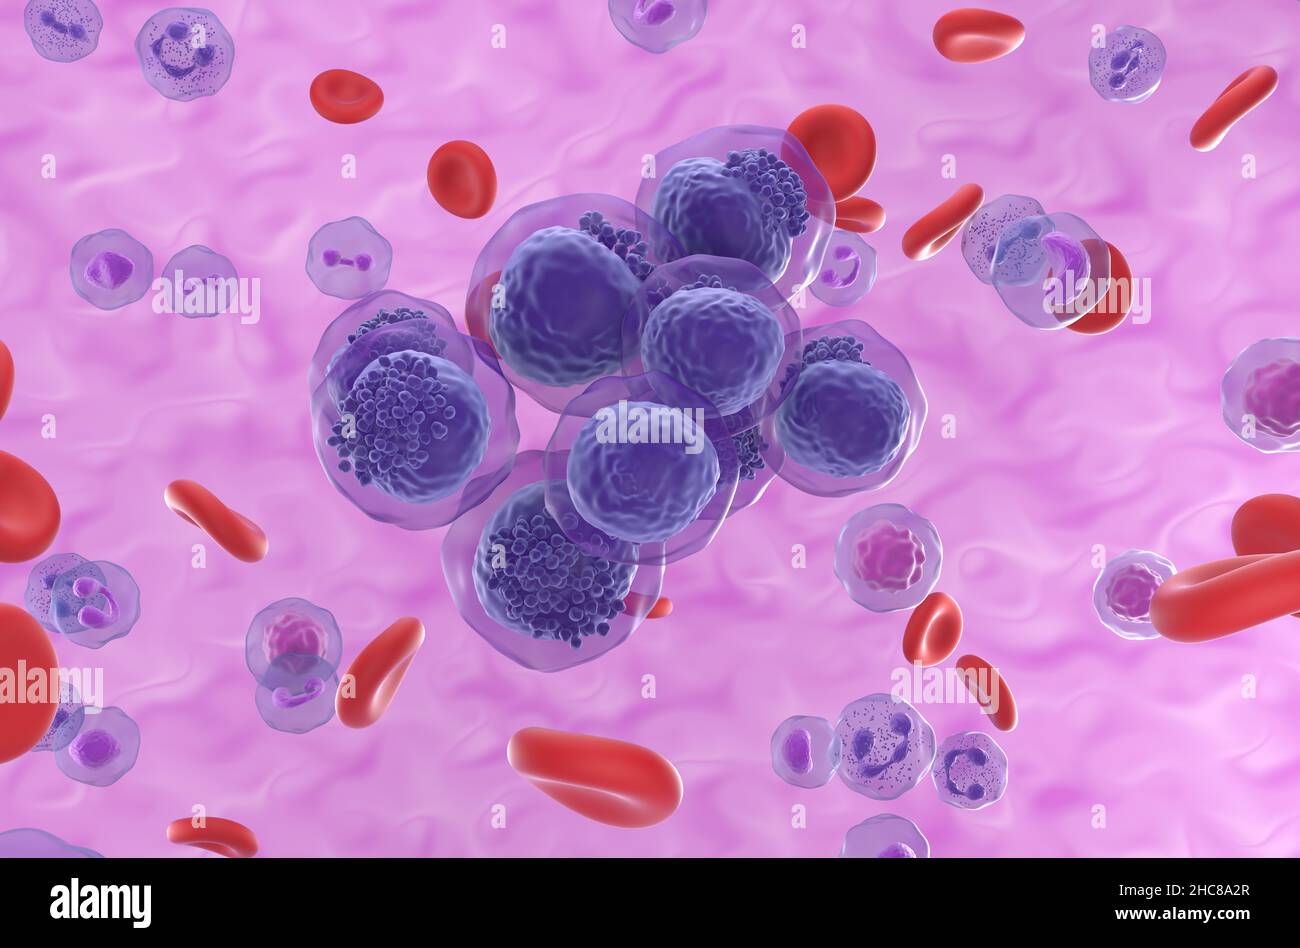 Acute myeloid leukemia (AML) cells cluster in blood flow - isometric view 3d illustration Stock Photo